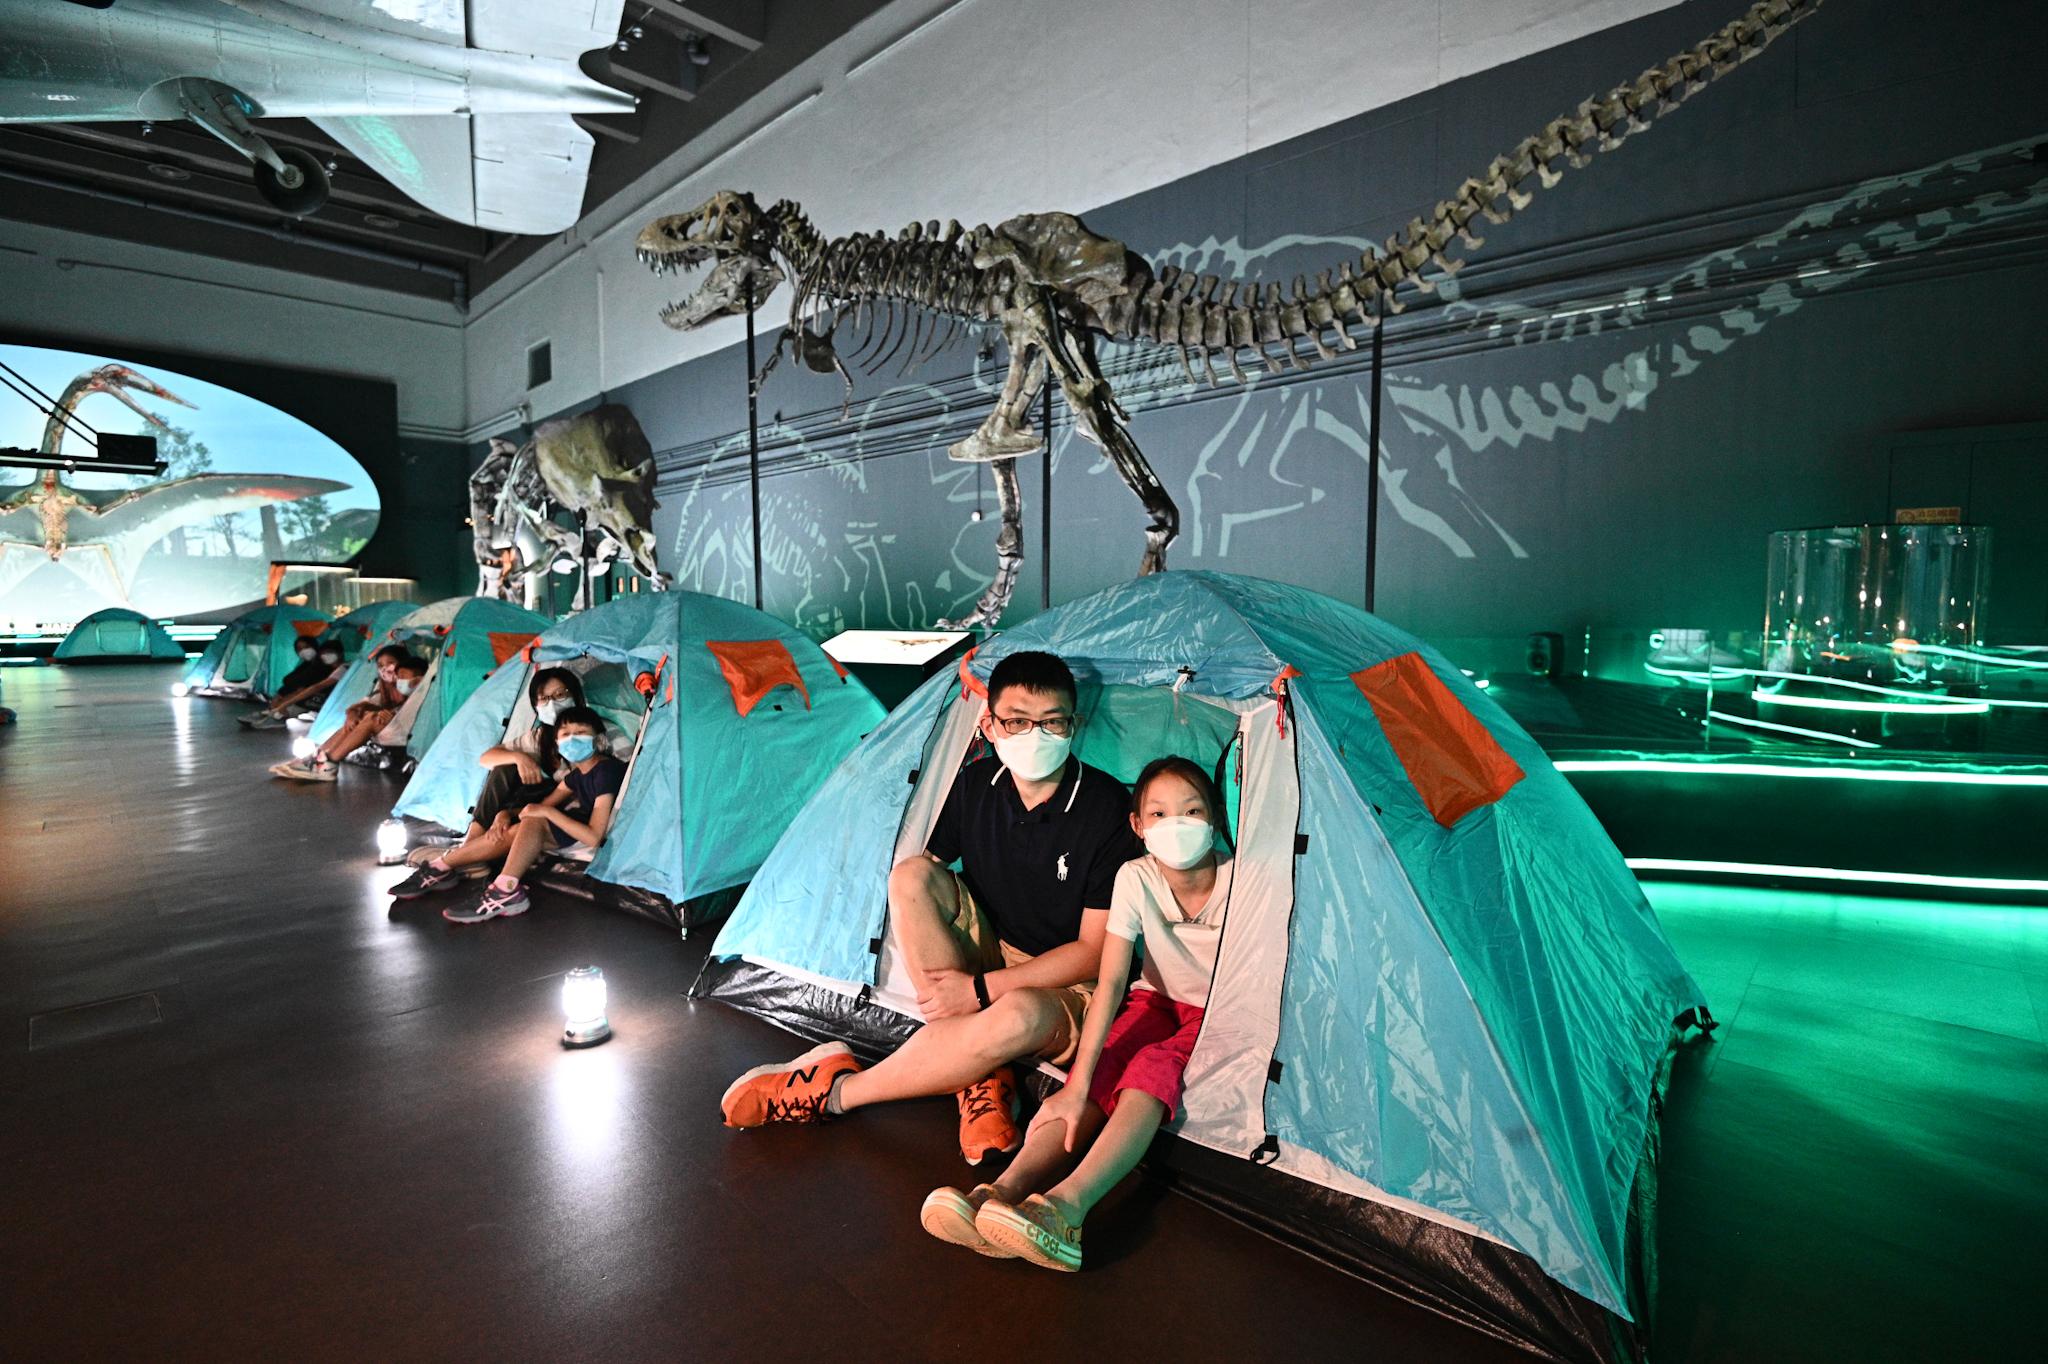 The Hong Kong Science Museum held the first session of "A Night with Dinosaurs" sleepover programme last night (August 5). Participants got ready to sleep in the tents set beneath dinosaur fossils at the gallery.